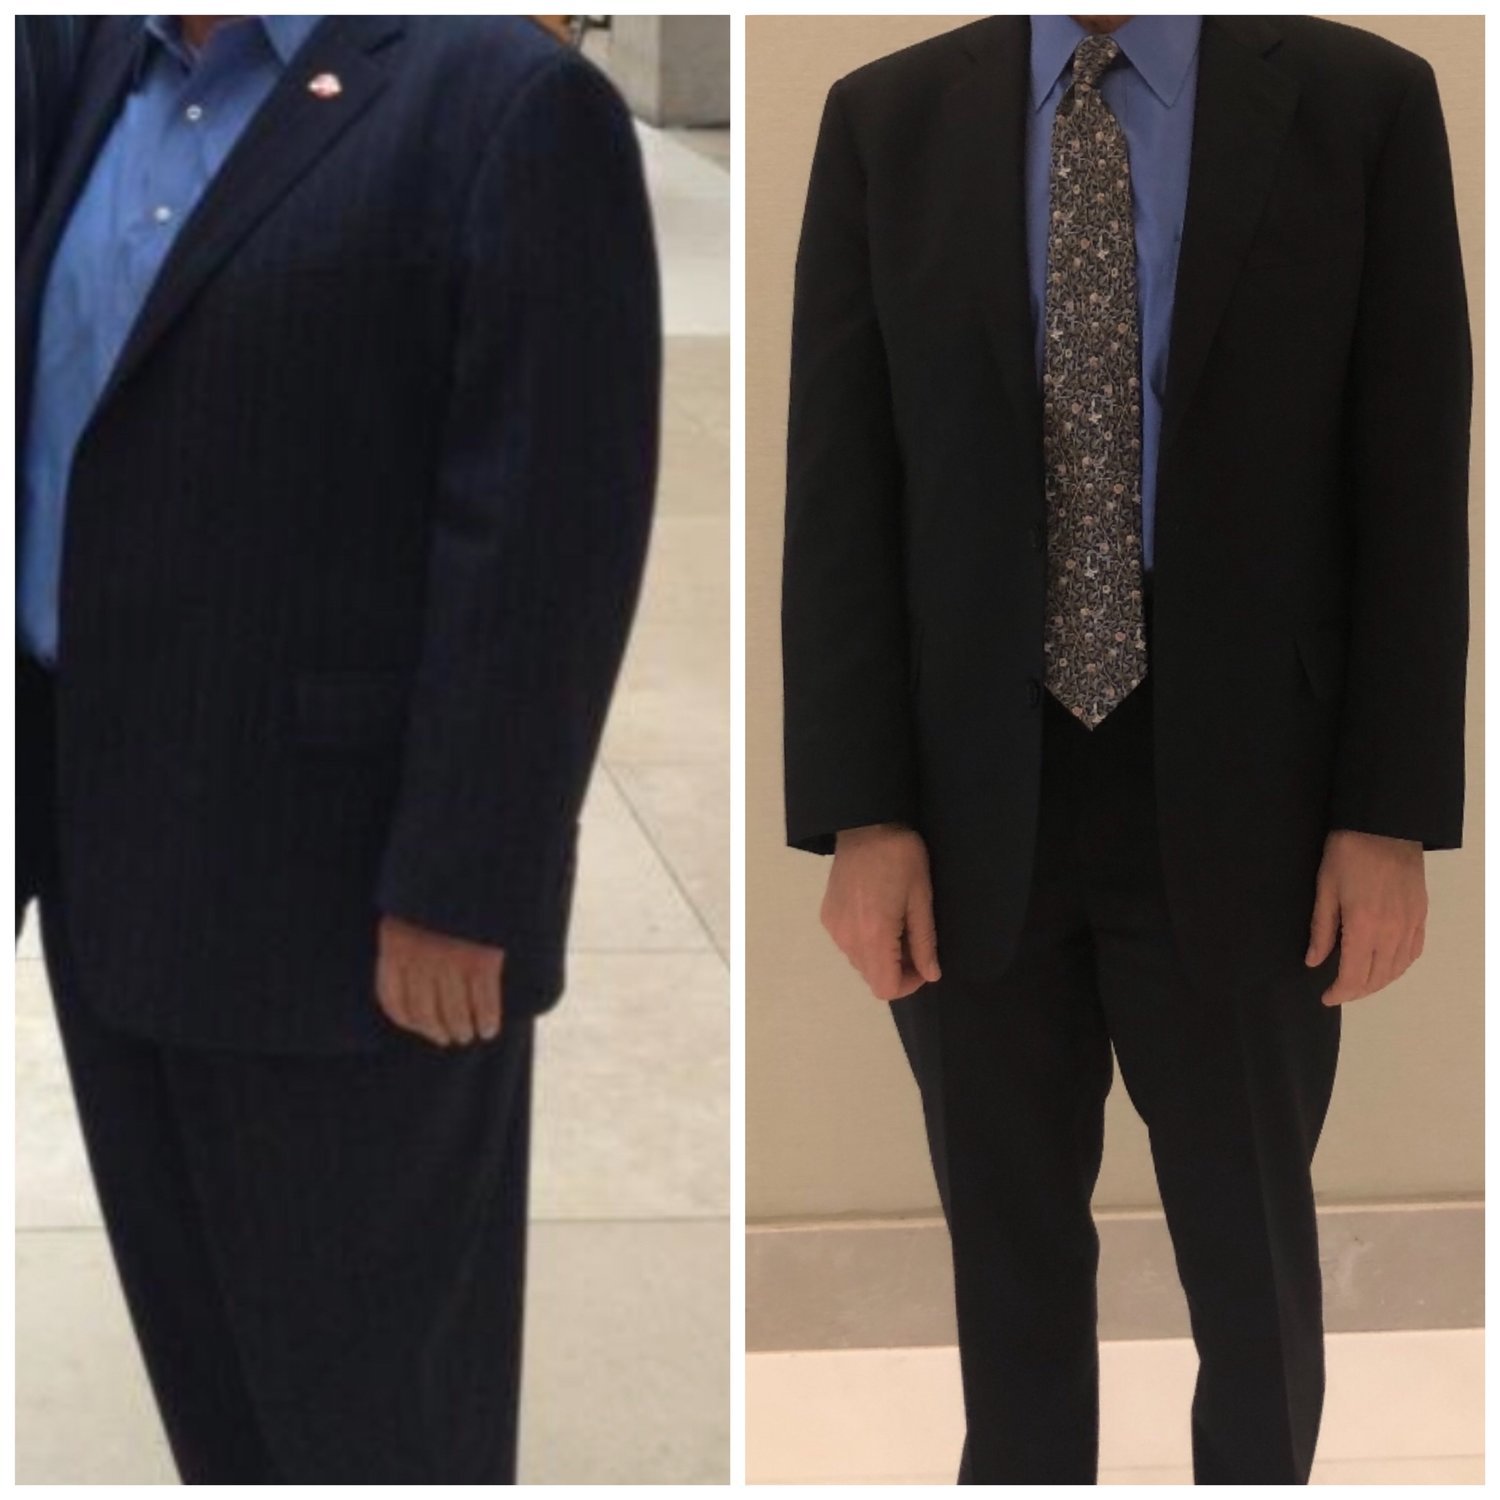 DougFit Personal Trainer & Nutritionist NYC Weightloss Success.jpeg